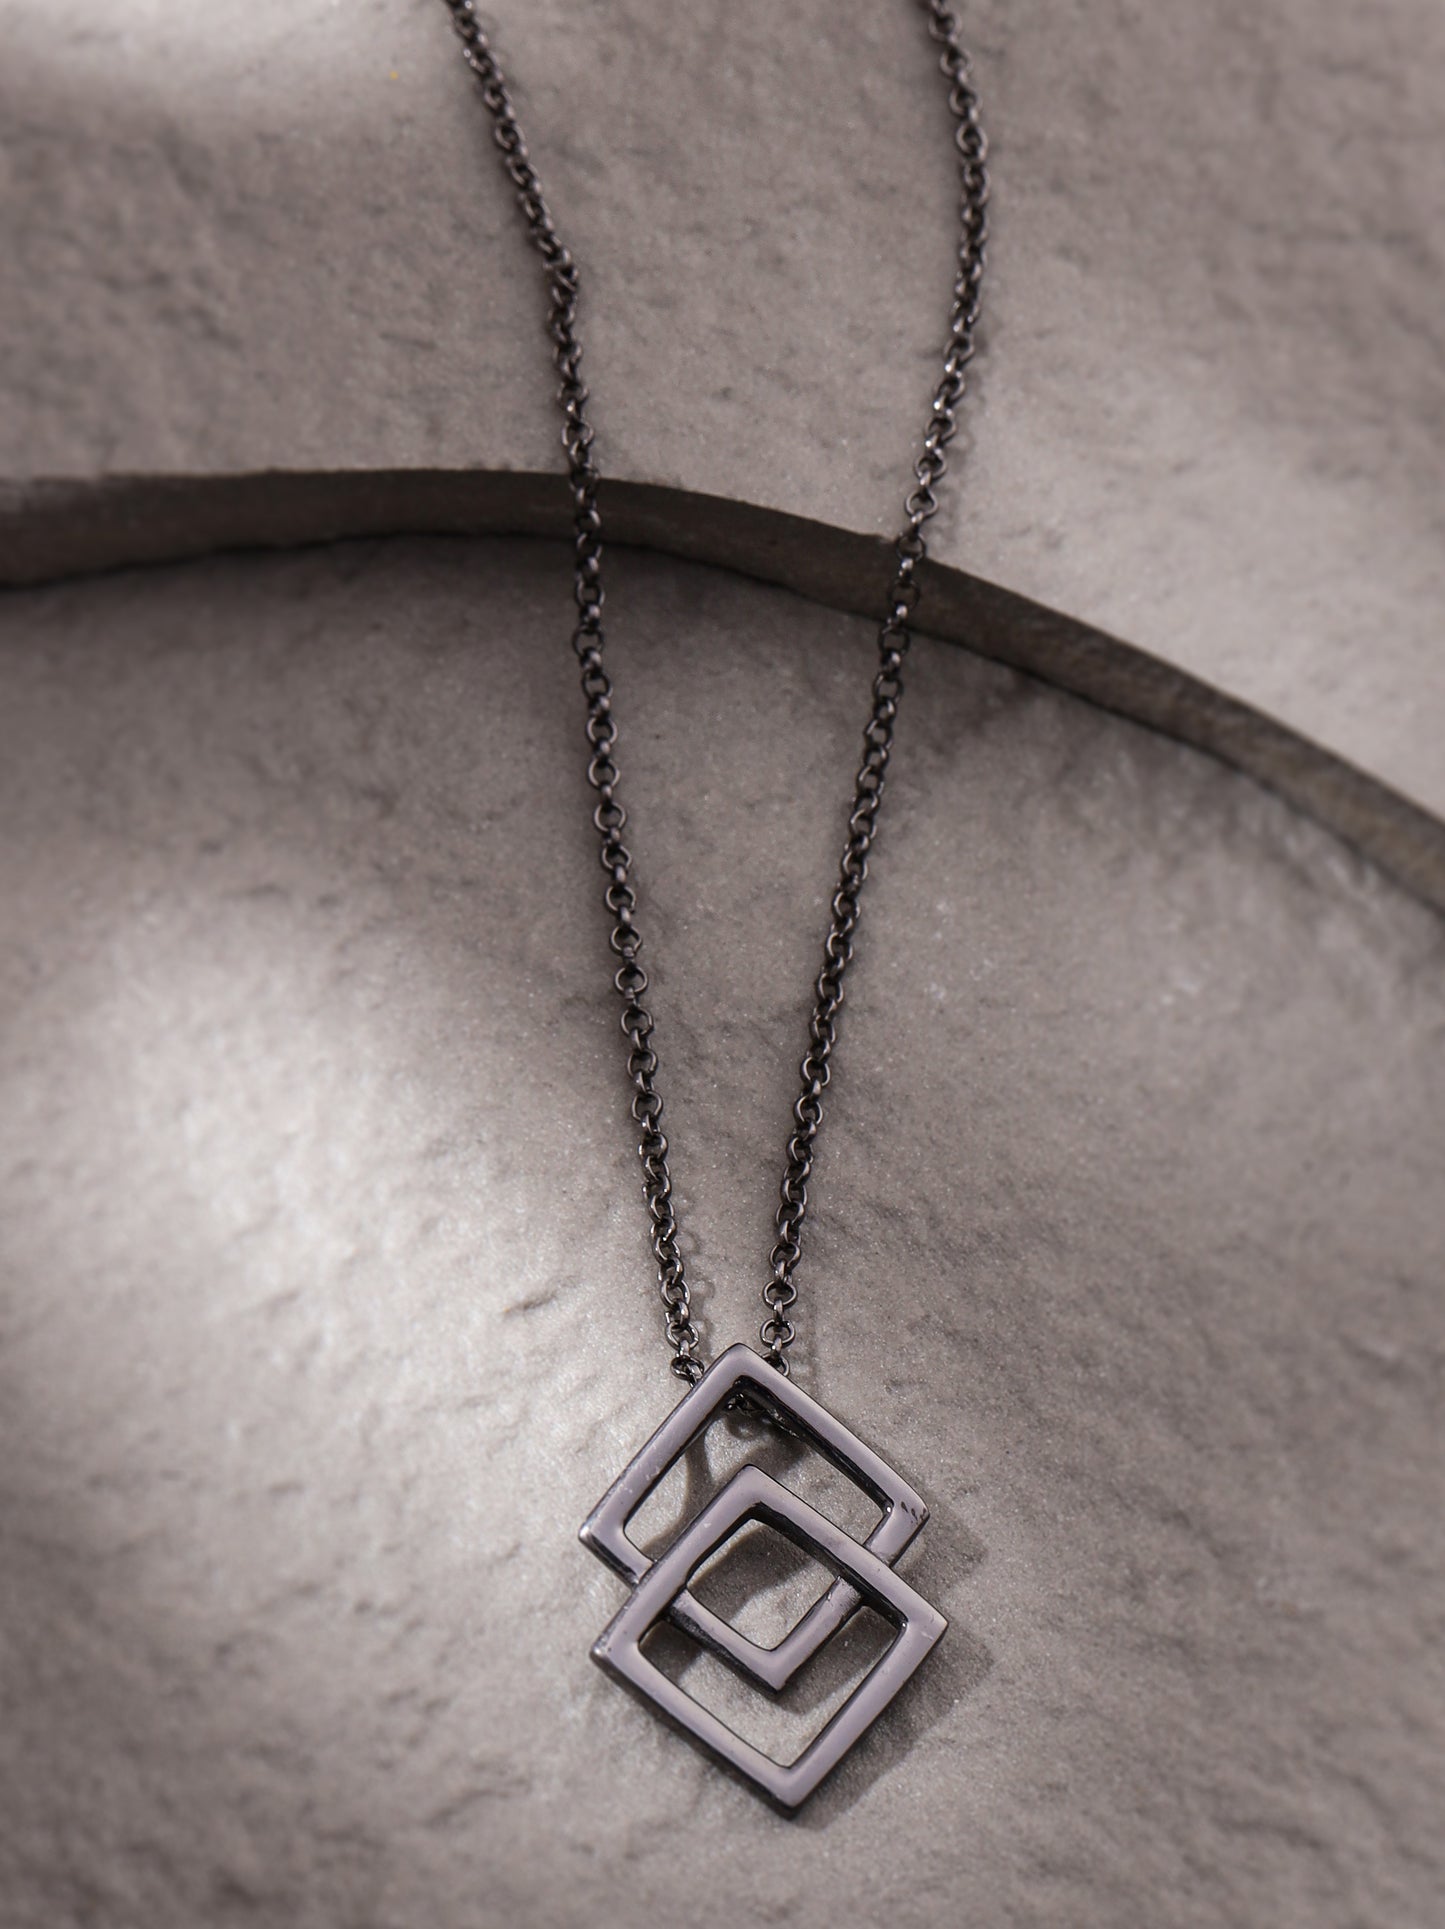 The Symphonic Fusion pendant with chain